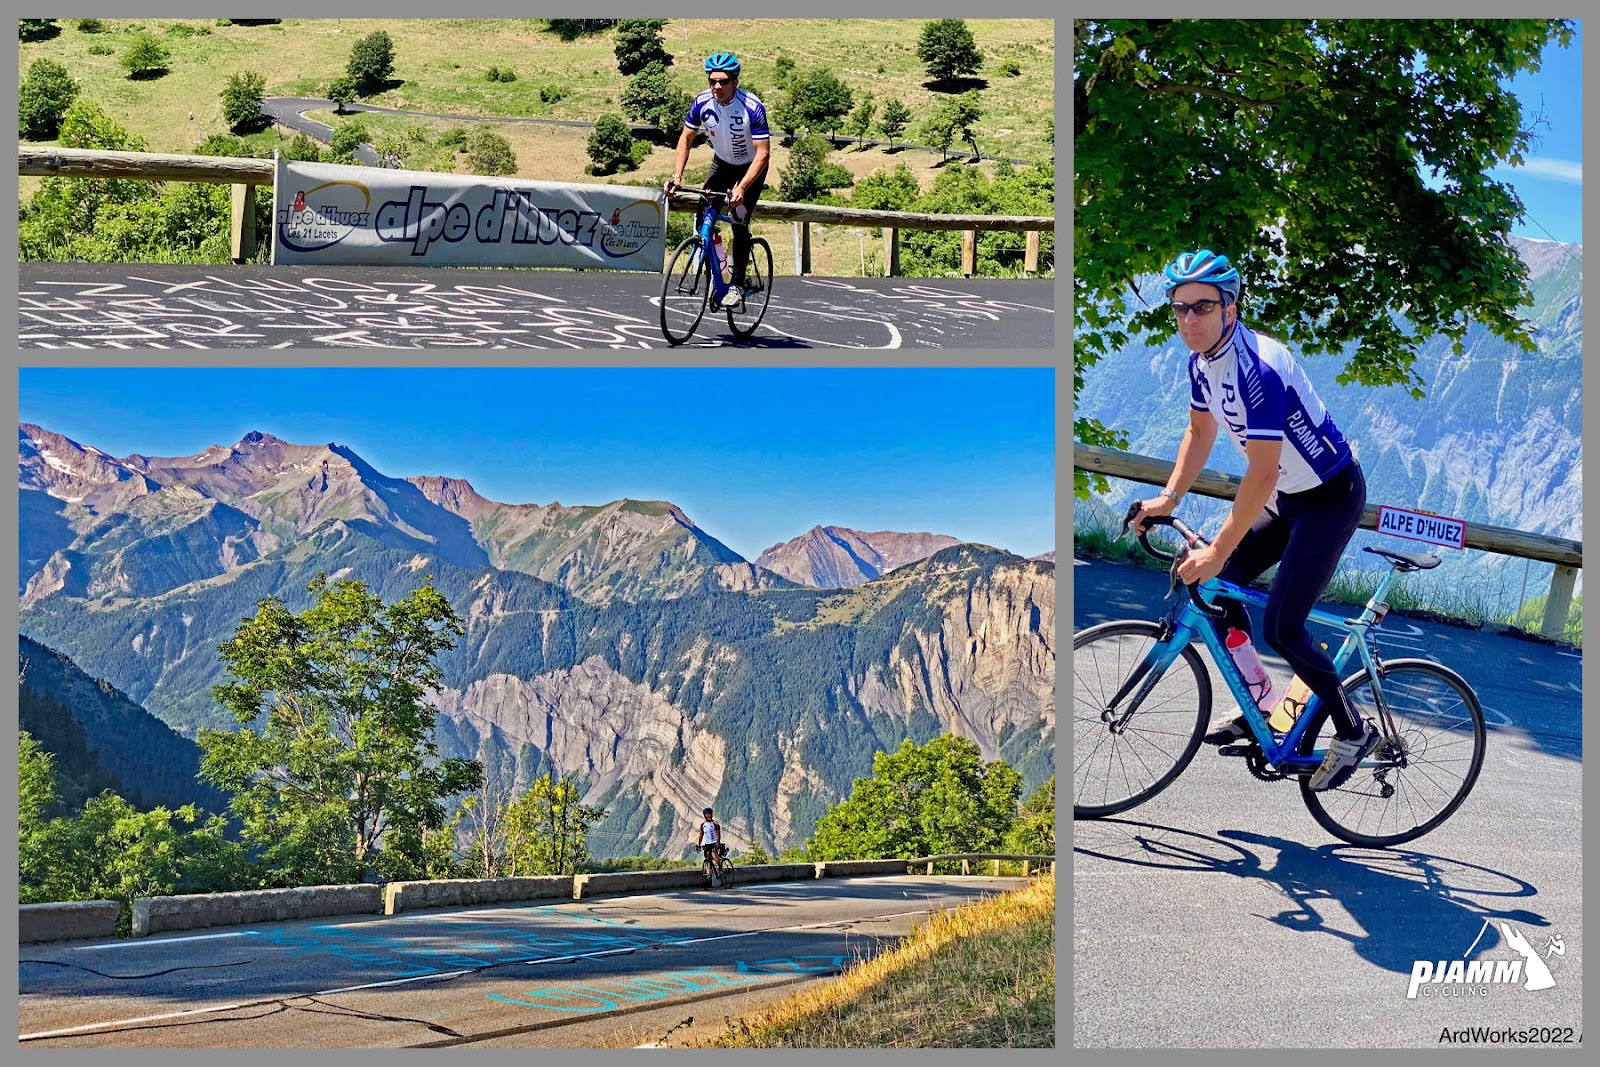 photo collage shows PJAMM Cyclist riding Alpe d'Huez bike climb, background of stunning rock formations and Alpe setting